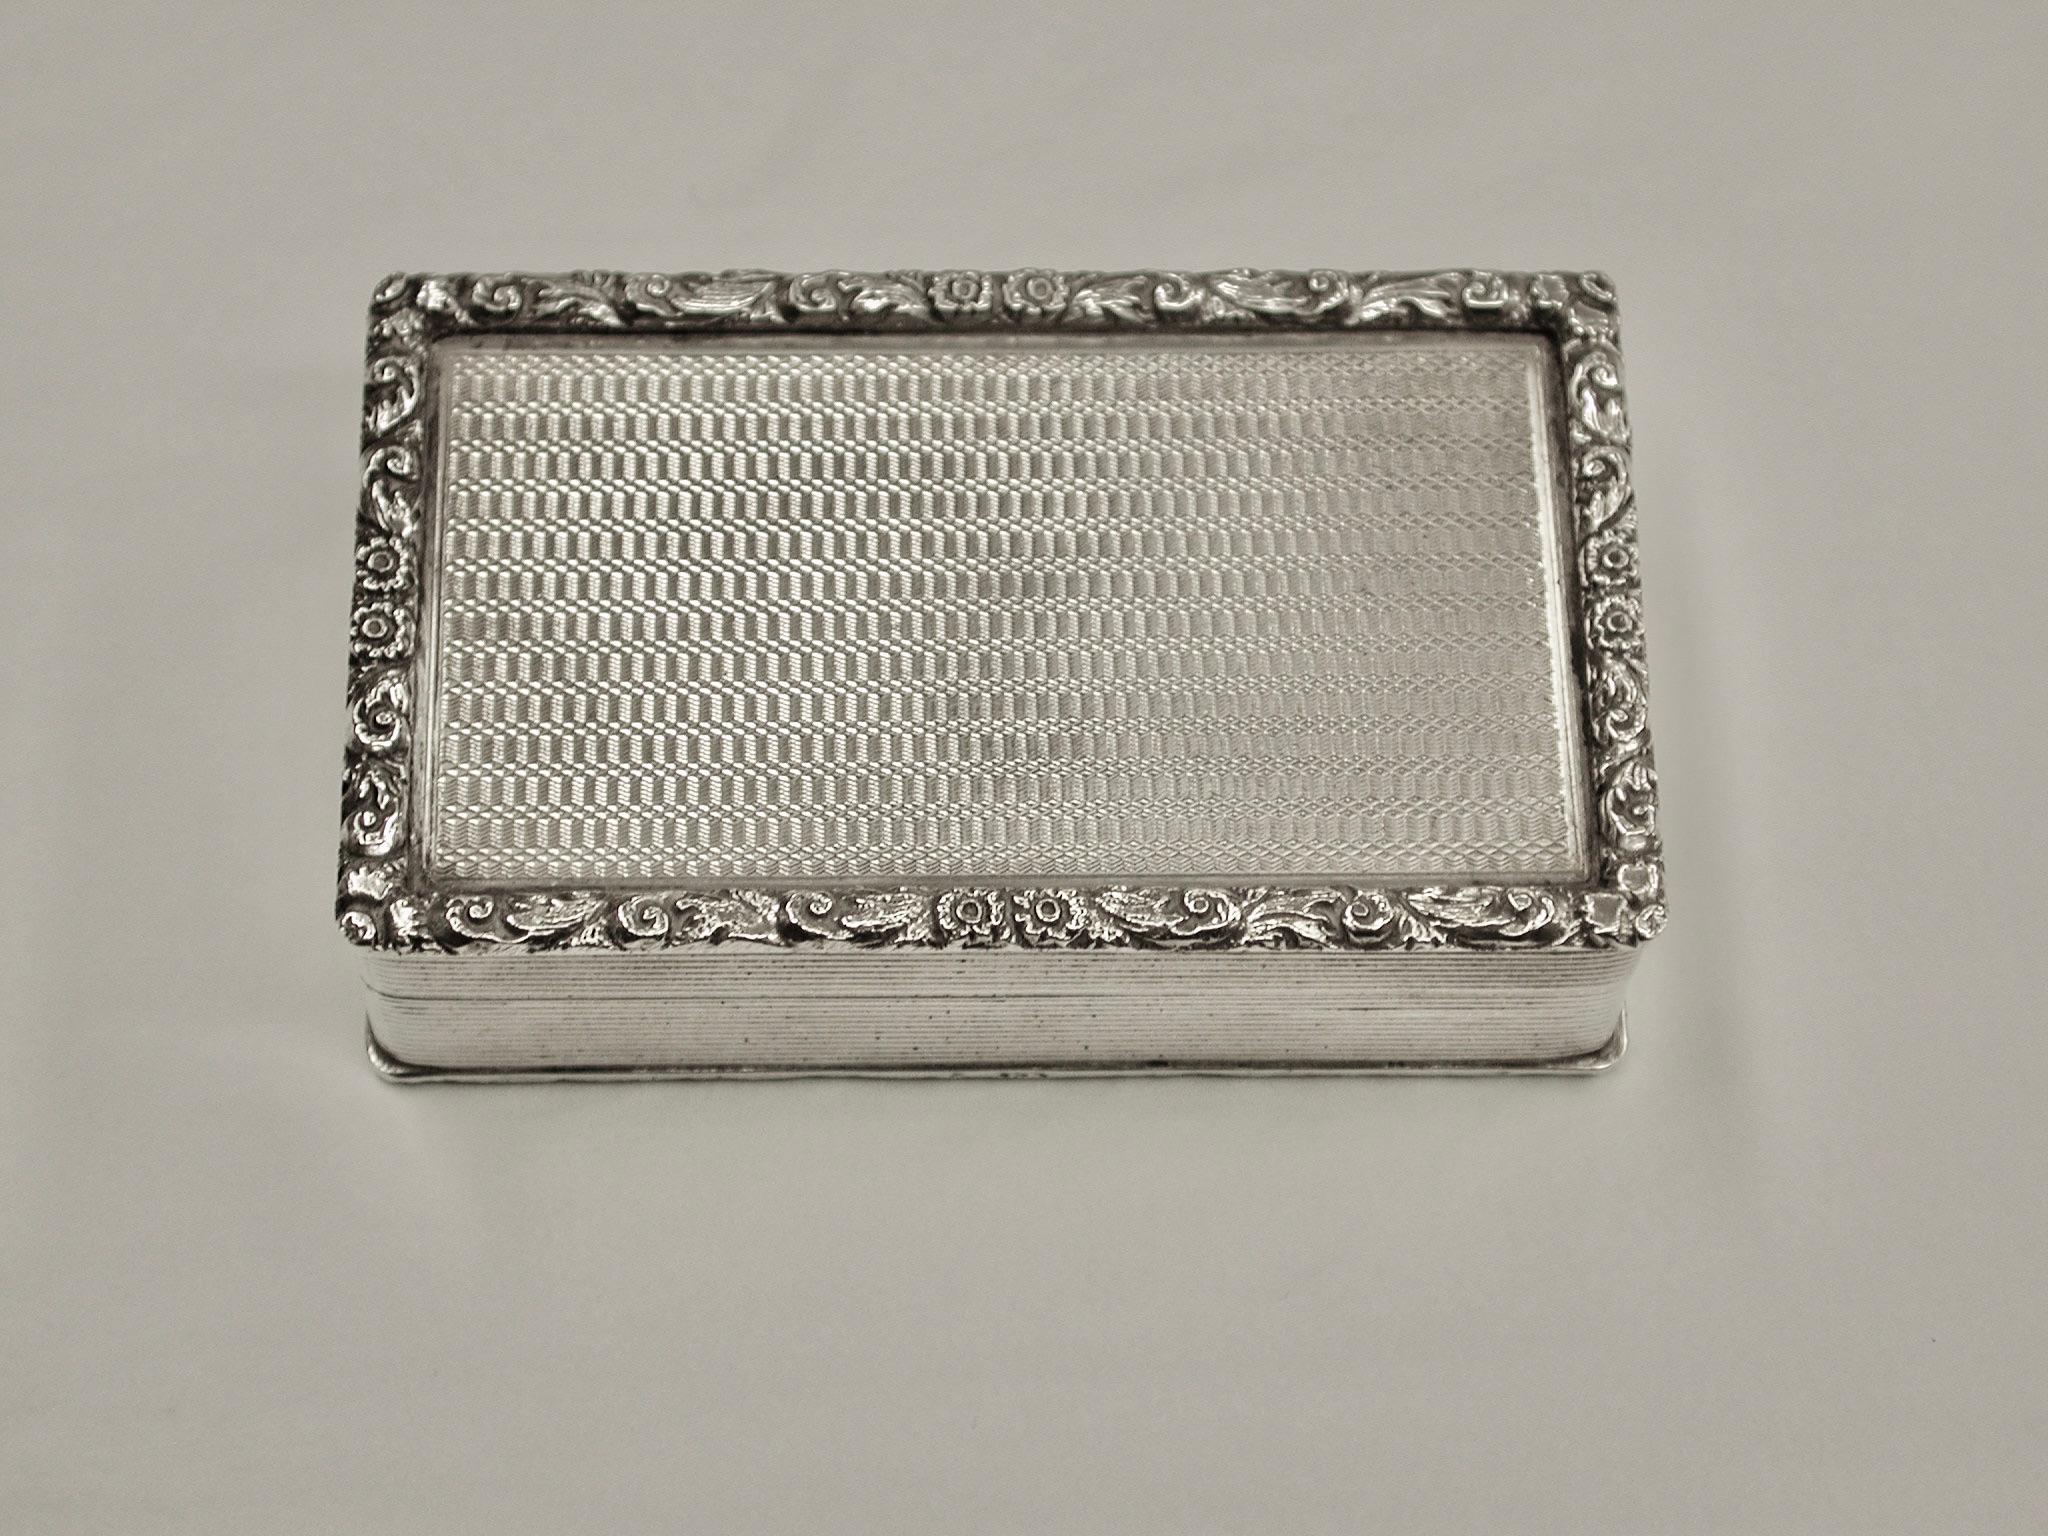 Good quality silver Engine turned snuff box,1928, London Assay.
Made by Adolph Barach Davis, in a very high standard of workmanship.
There is no wear at all on the cast border or engine-turning.
4 Troy ounces.